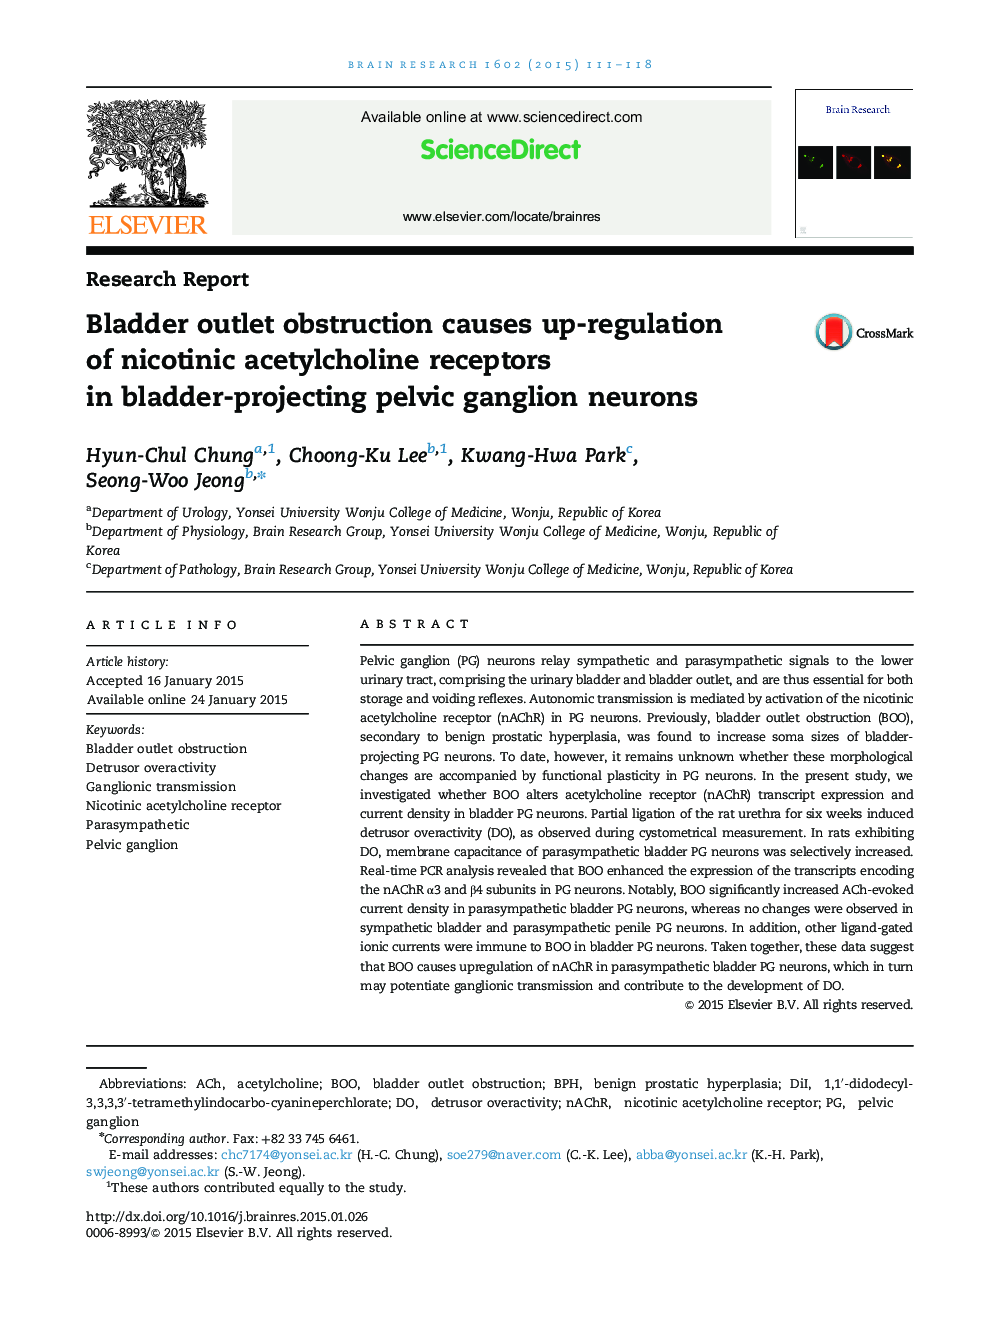 Bladder outlet obstruction causes up-regulation of nicotinic acetylcholine receptors in bladder-projecting pelvic ganglion neurons